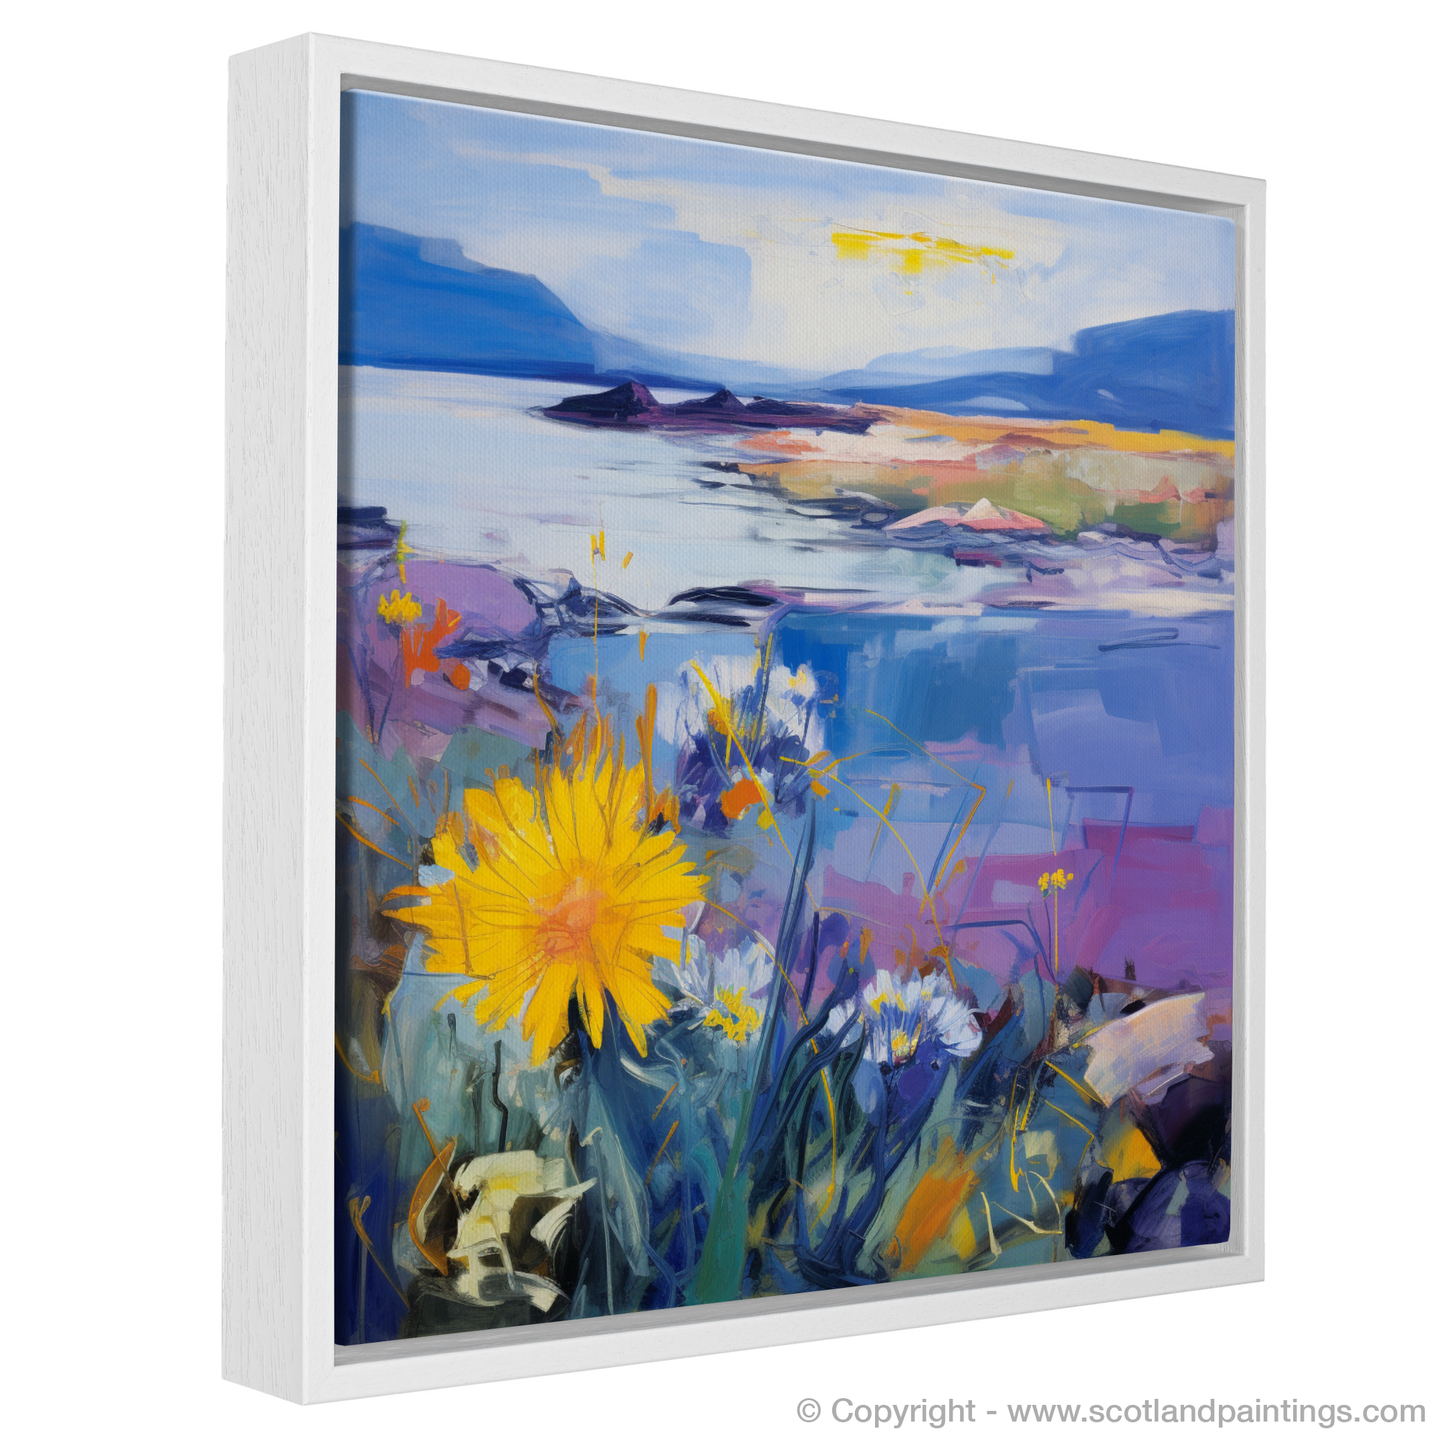 Wild Blooms of Solway: An Abstract Expressionist Homage to Sea Aster